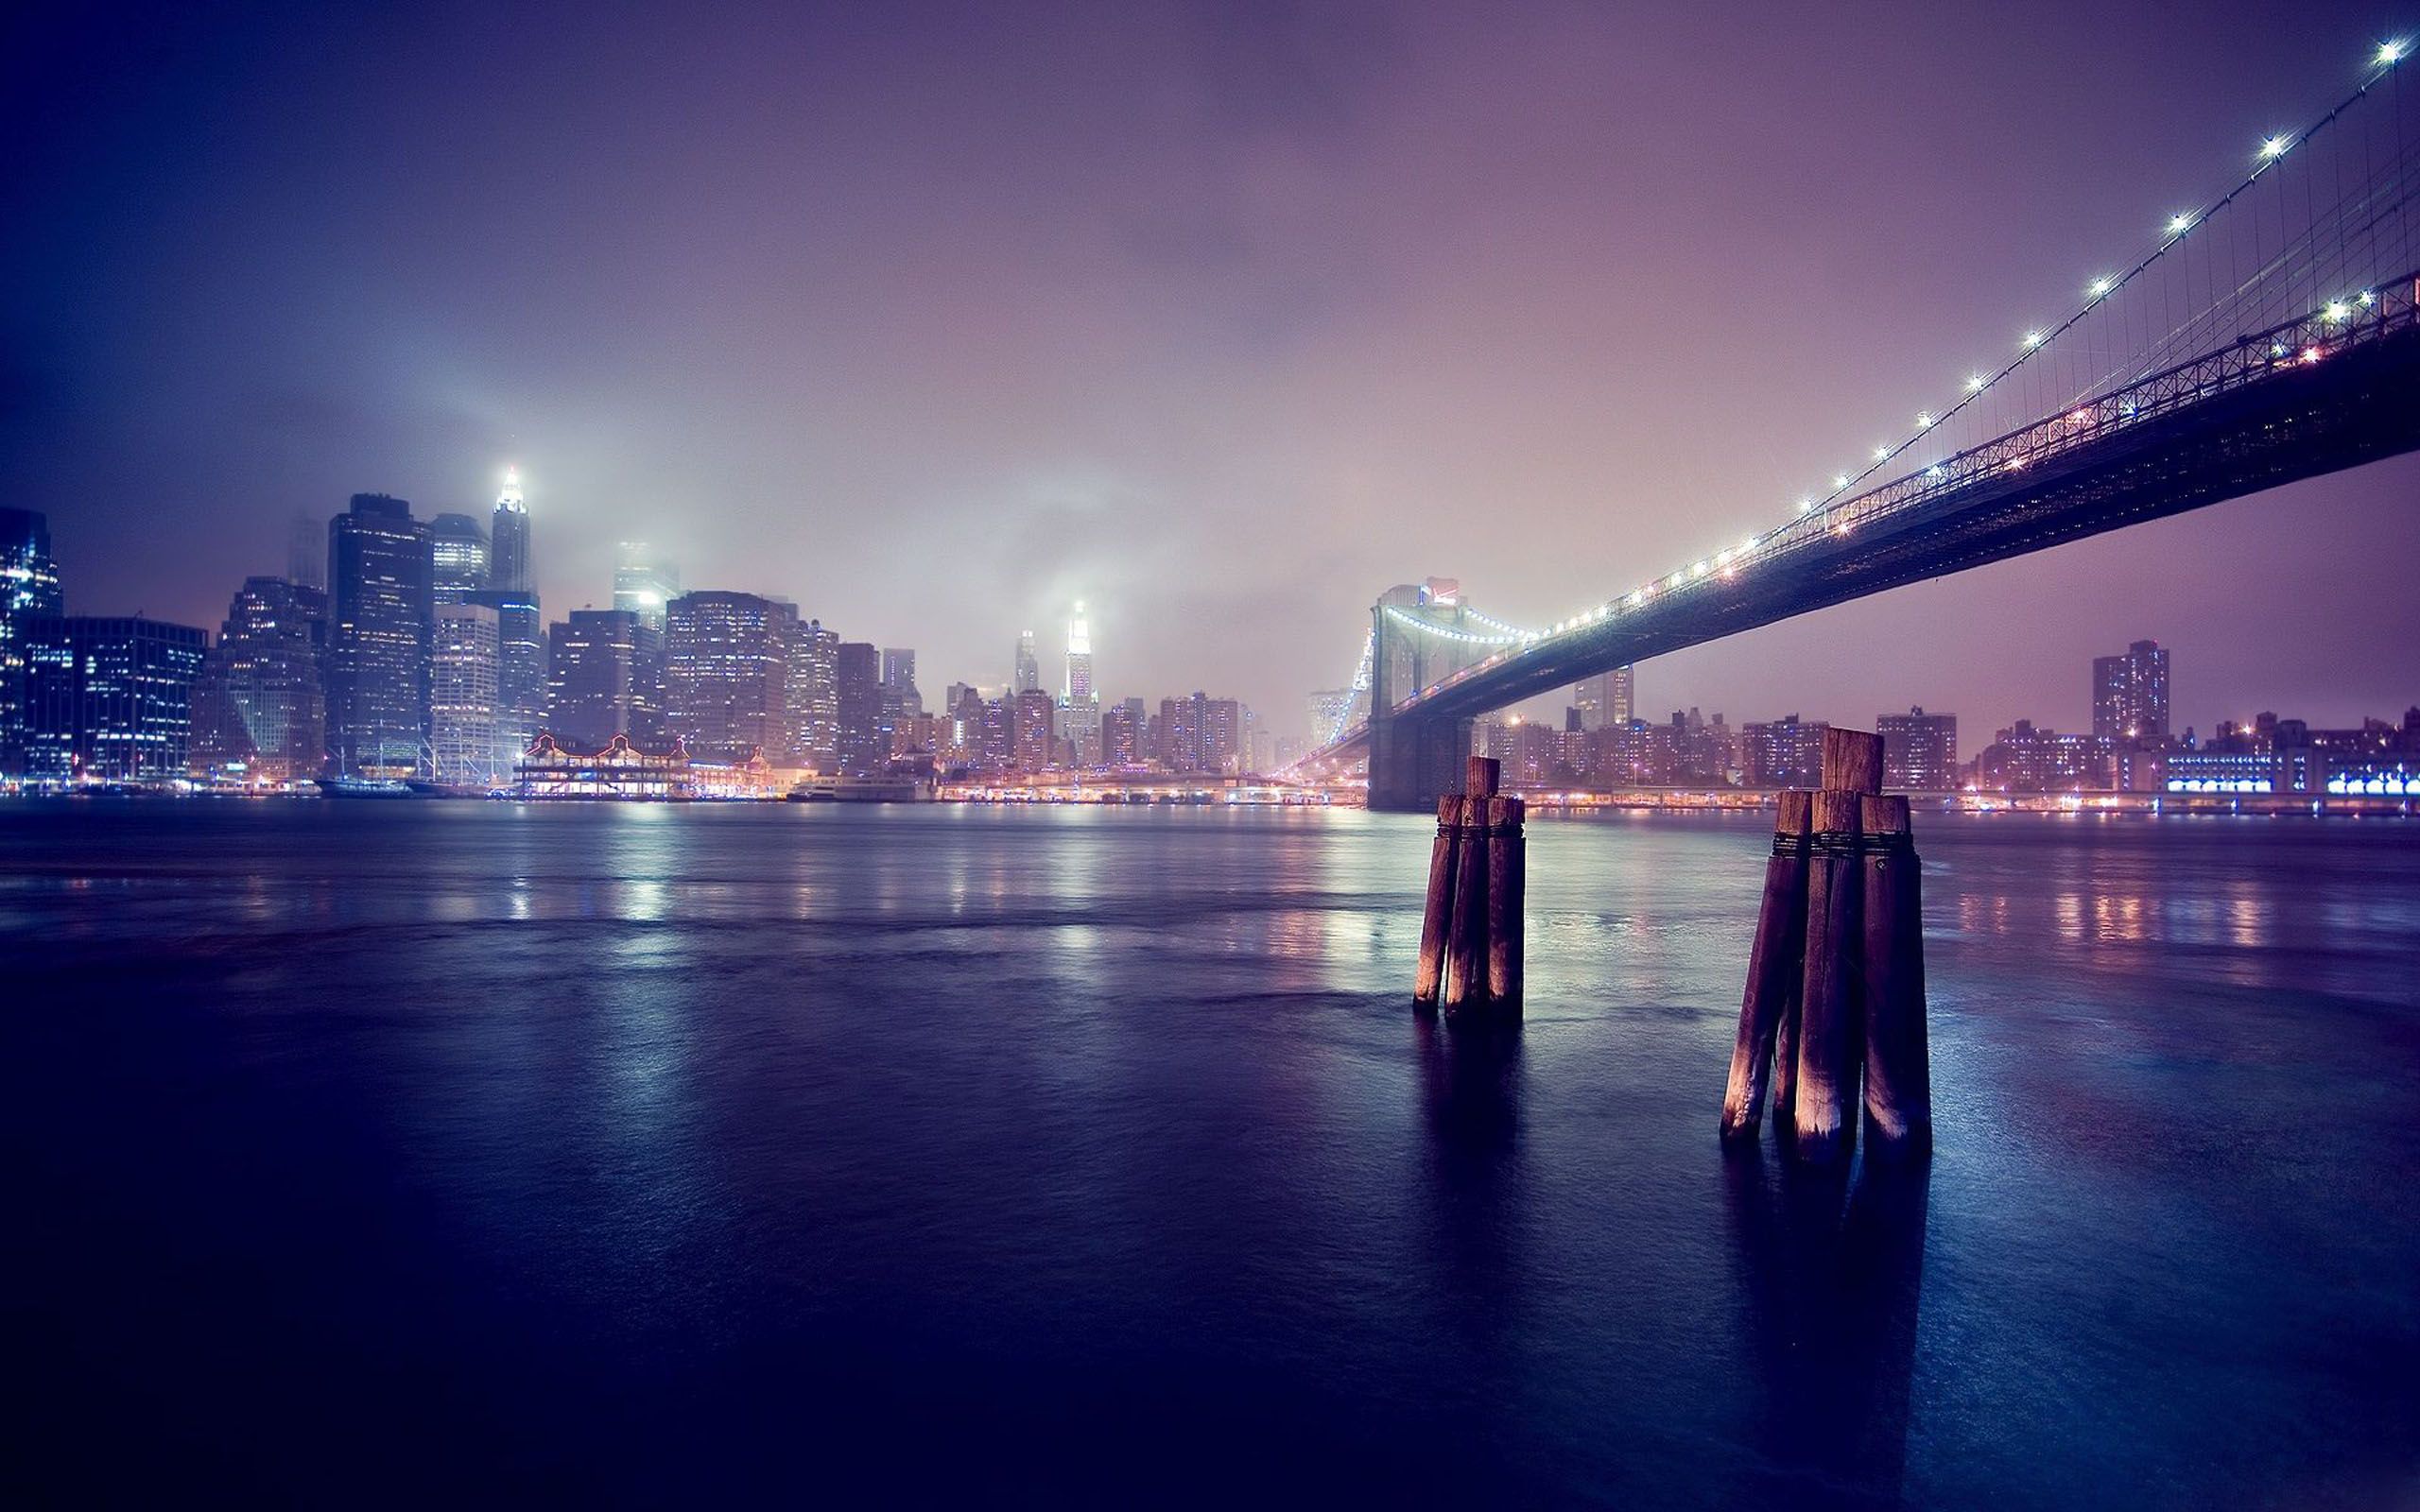 Brooklyn Bridge at night with the city lights in the background - 2560x1600, city